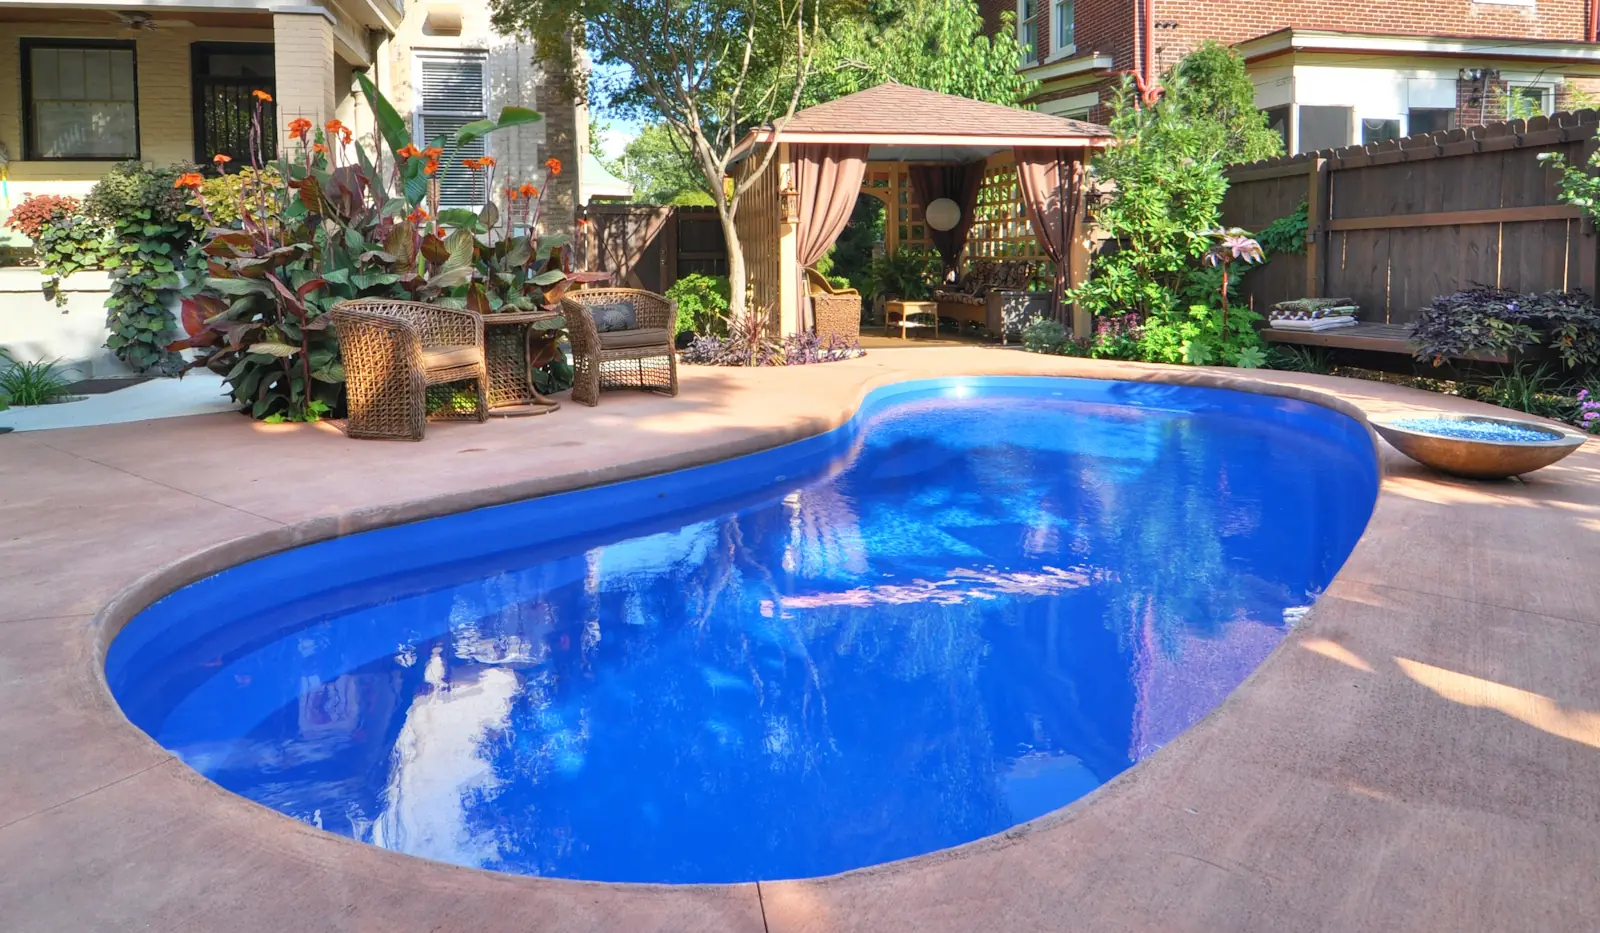 Top tips for choosing the perfect Kidney-Shaped Pool Cover